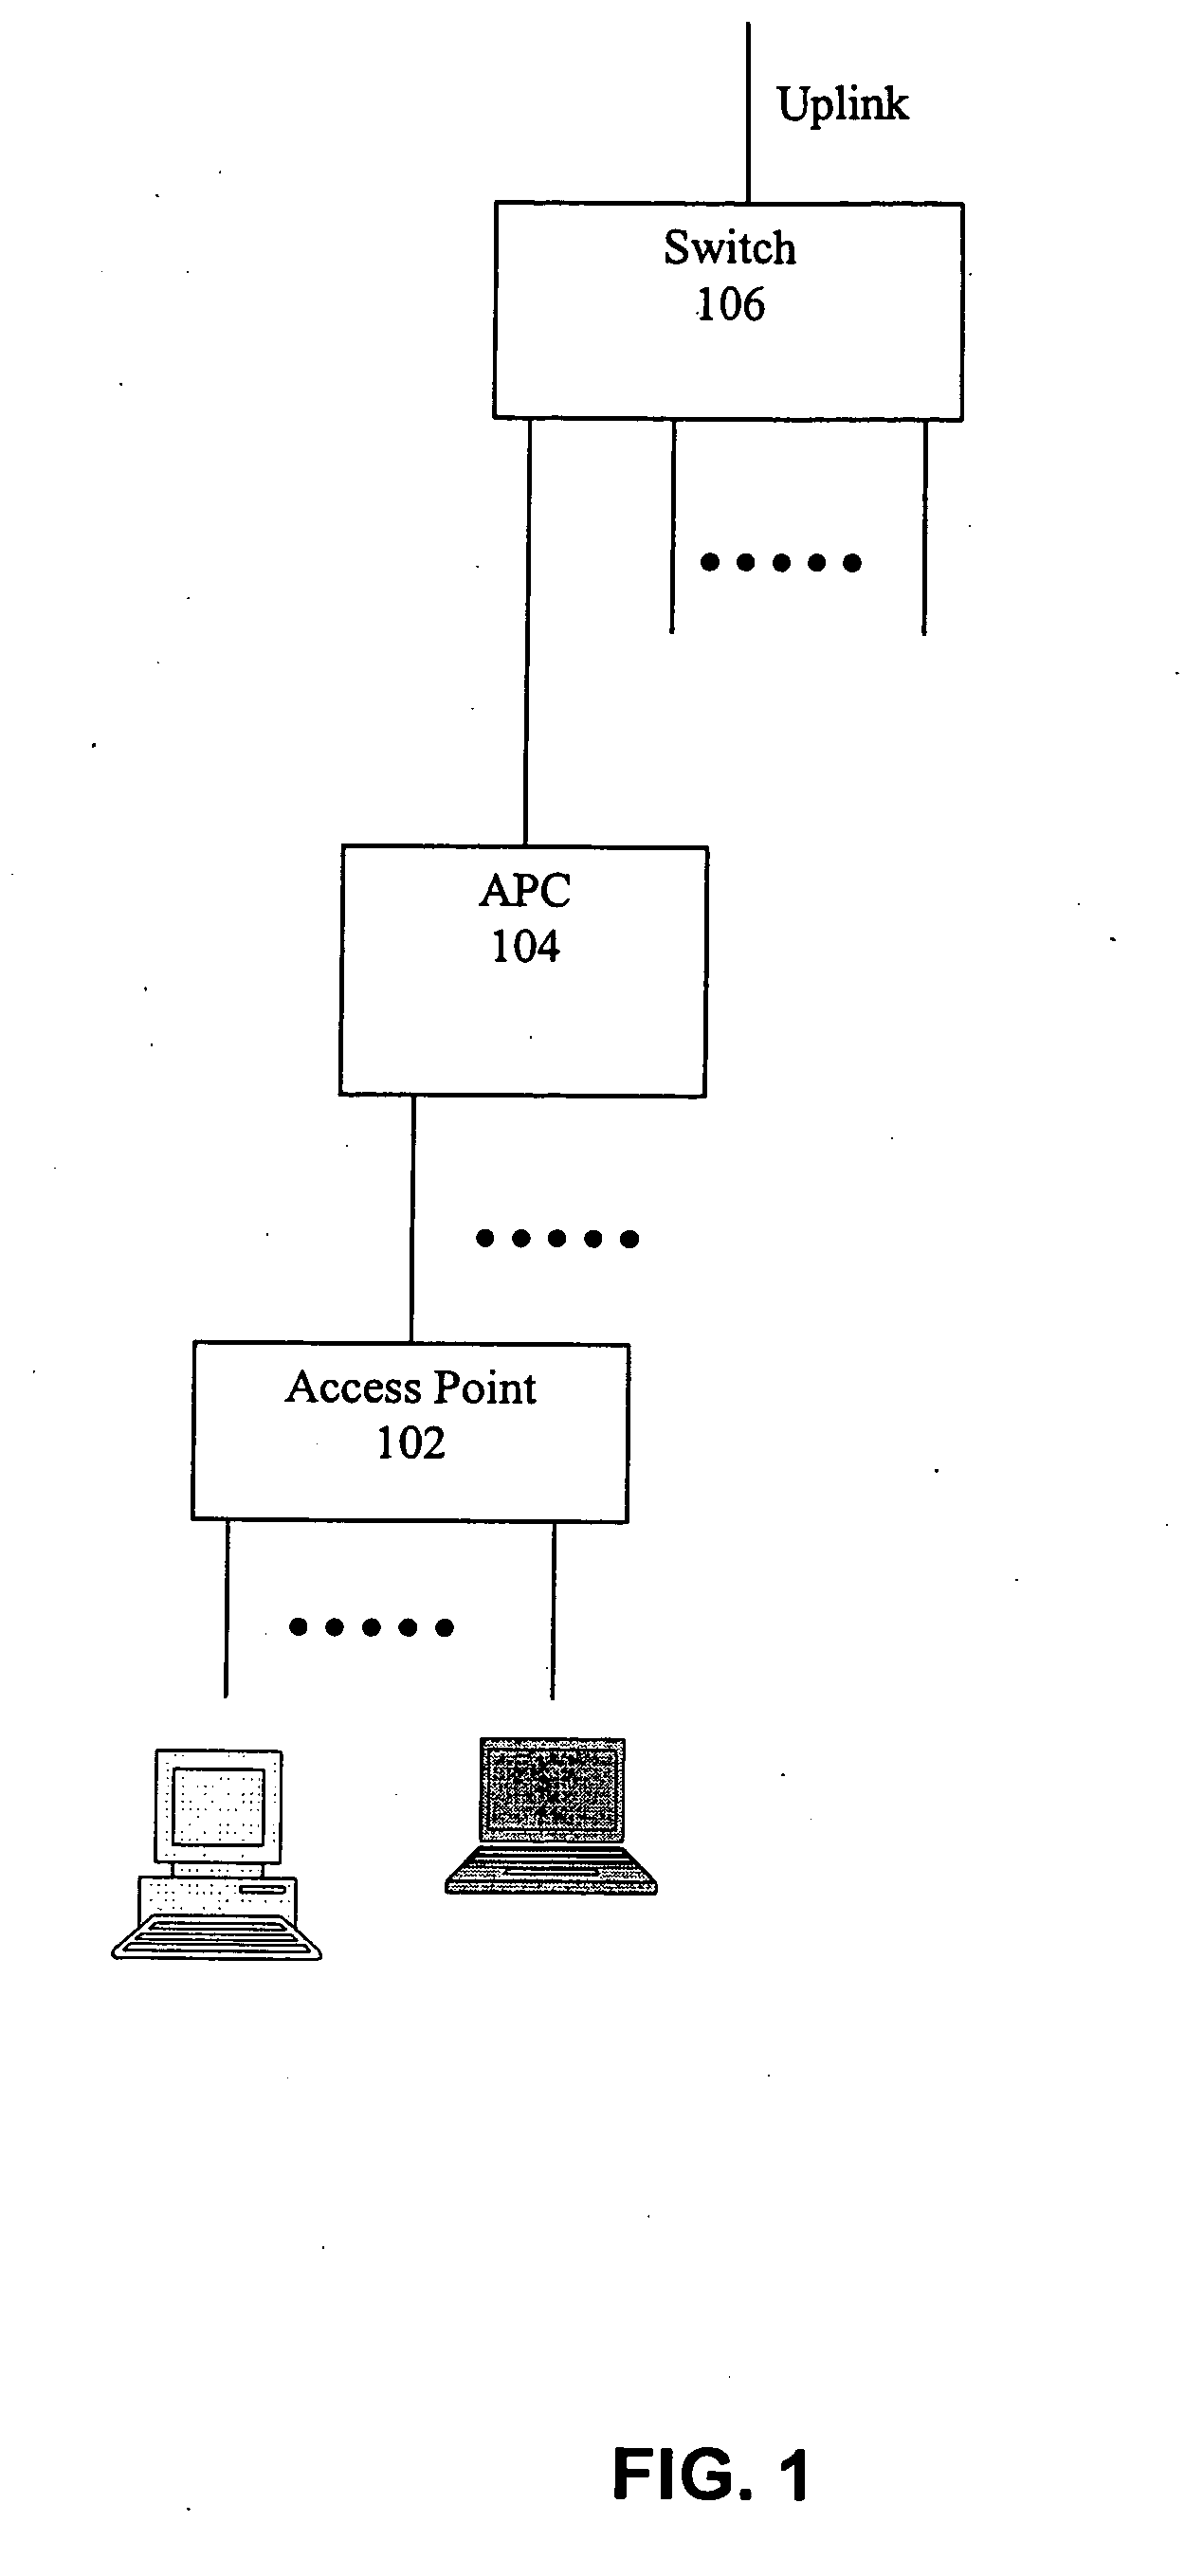 Hardware acceleration for Diffie Hellman in a device that integrates wired and wireless L2 and L3 switching functionality